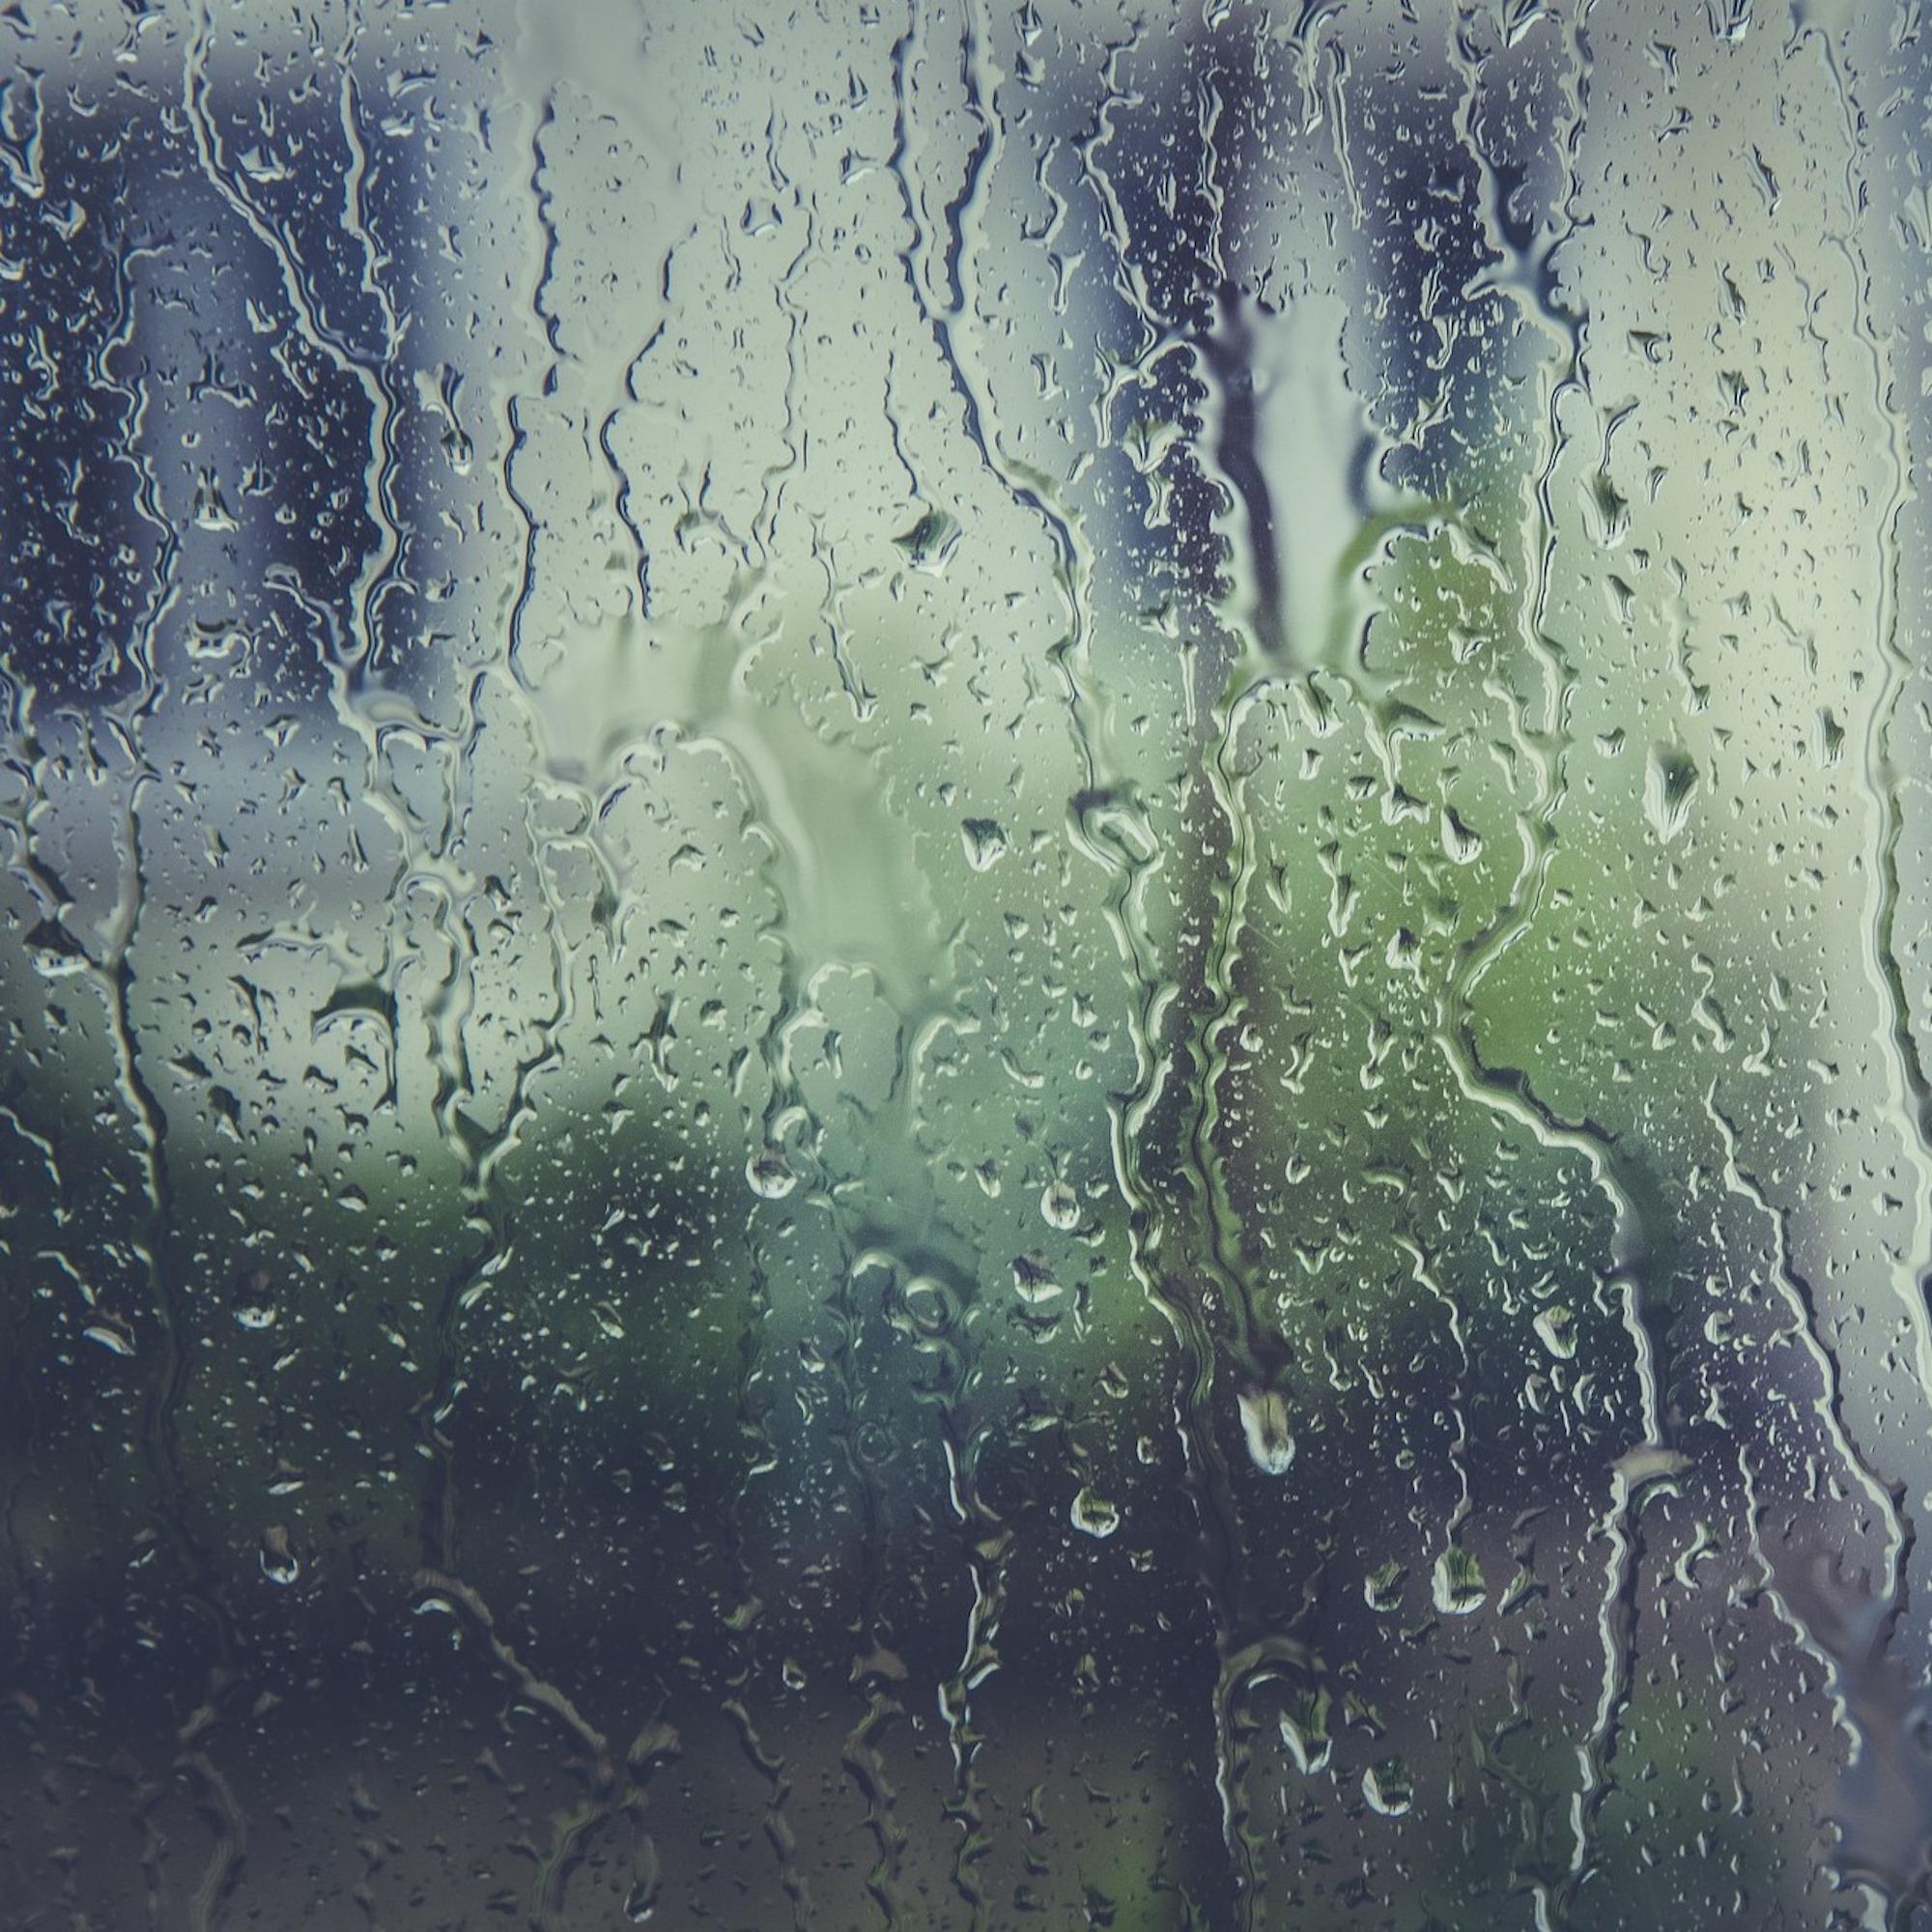 Rainy Day Parade: Ambient Music for Concentration